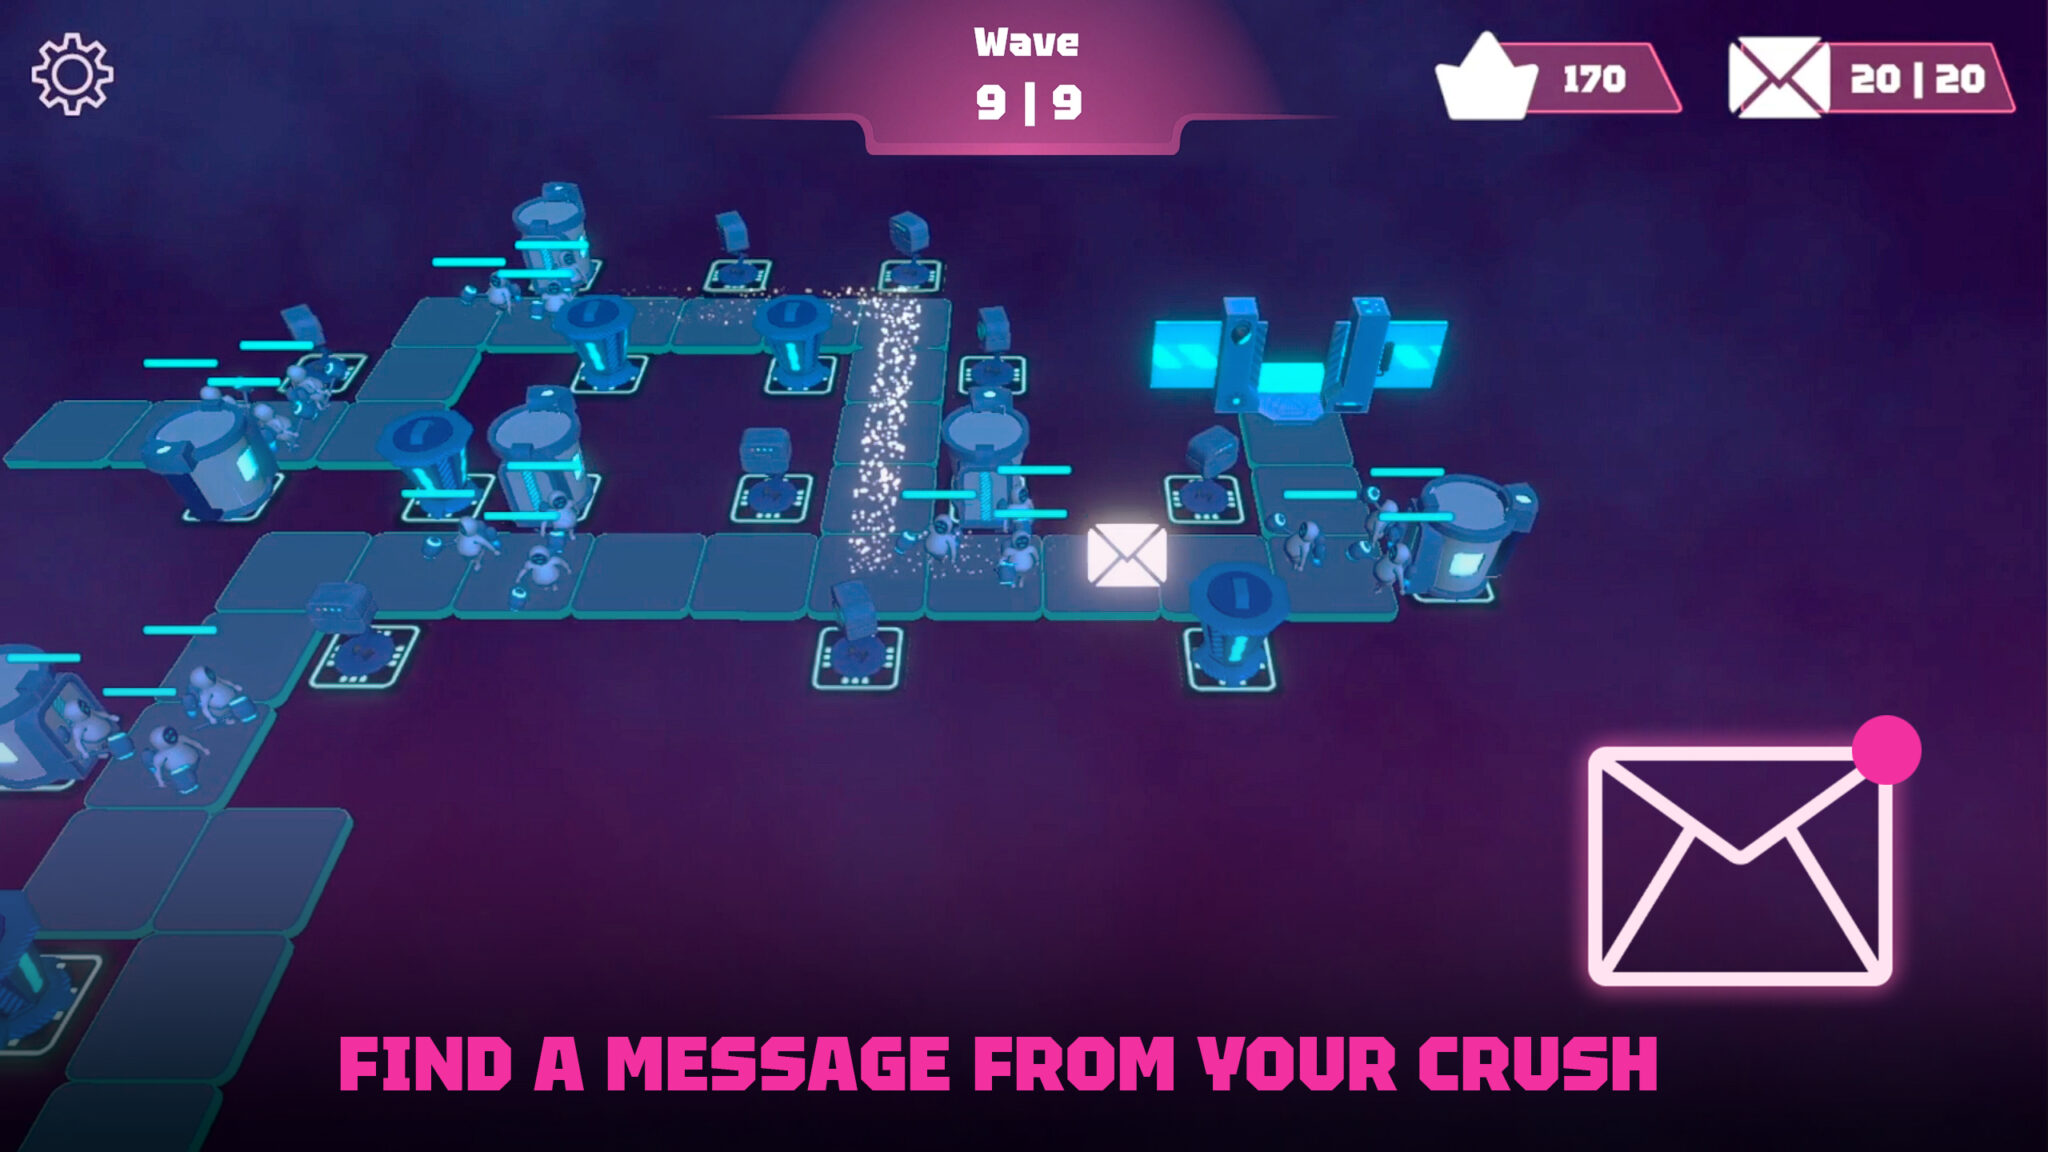 Crush Link TD screenshot of the game board on wave 9/9 with the text "find a message from your crush"